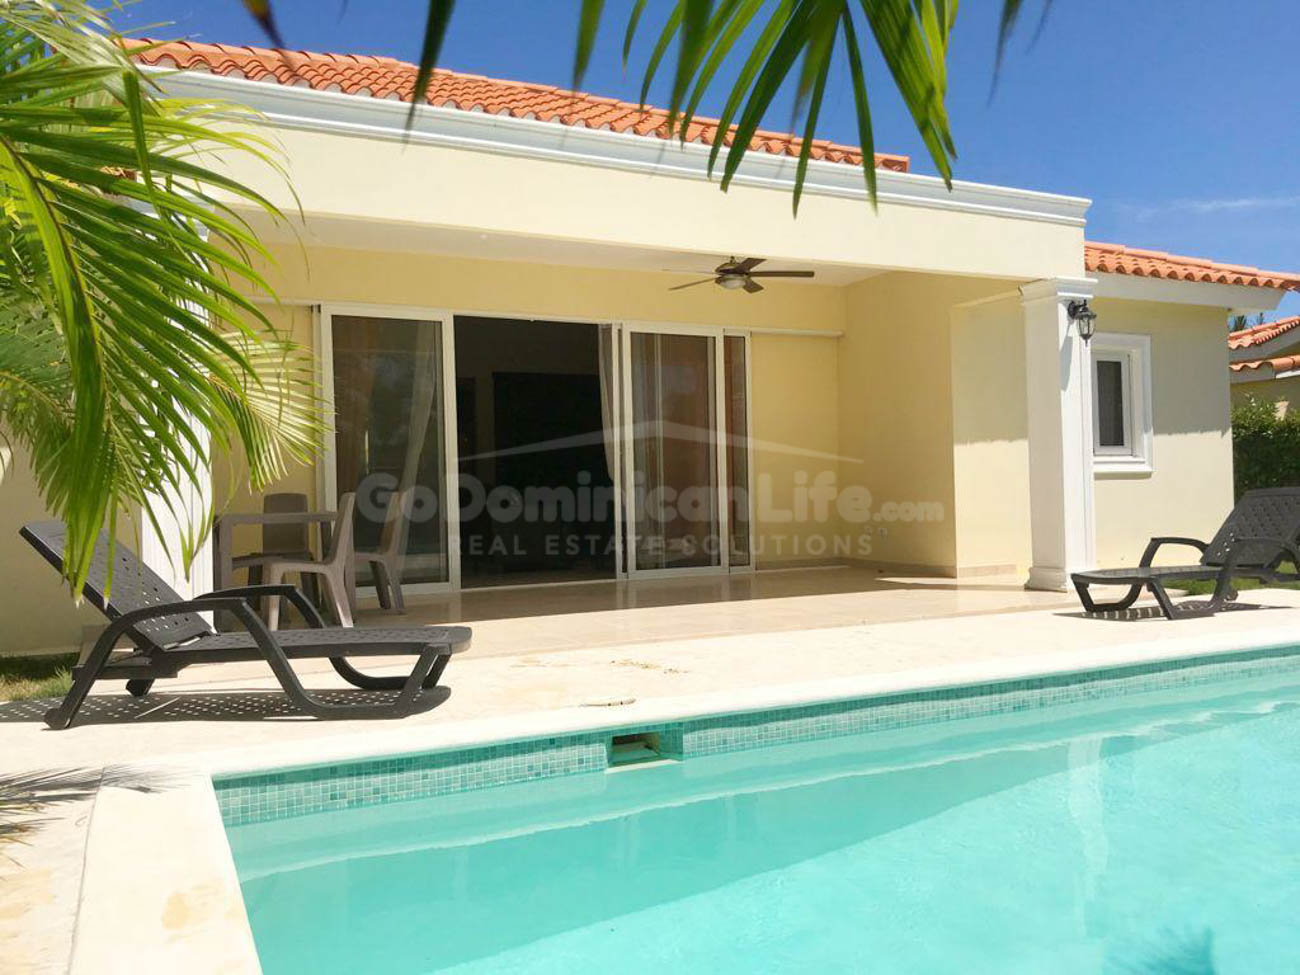 Your Home Away from Home in One of the Best Residential Areas in Sosua